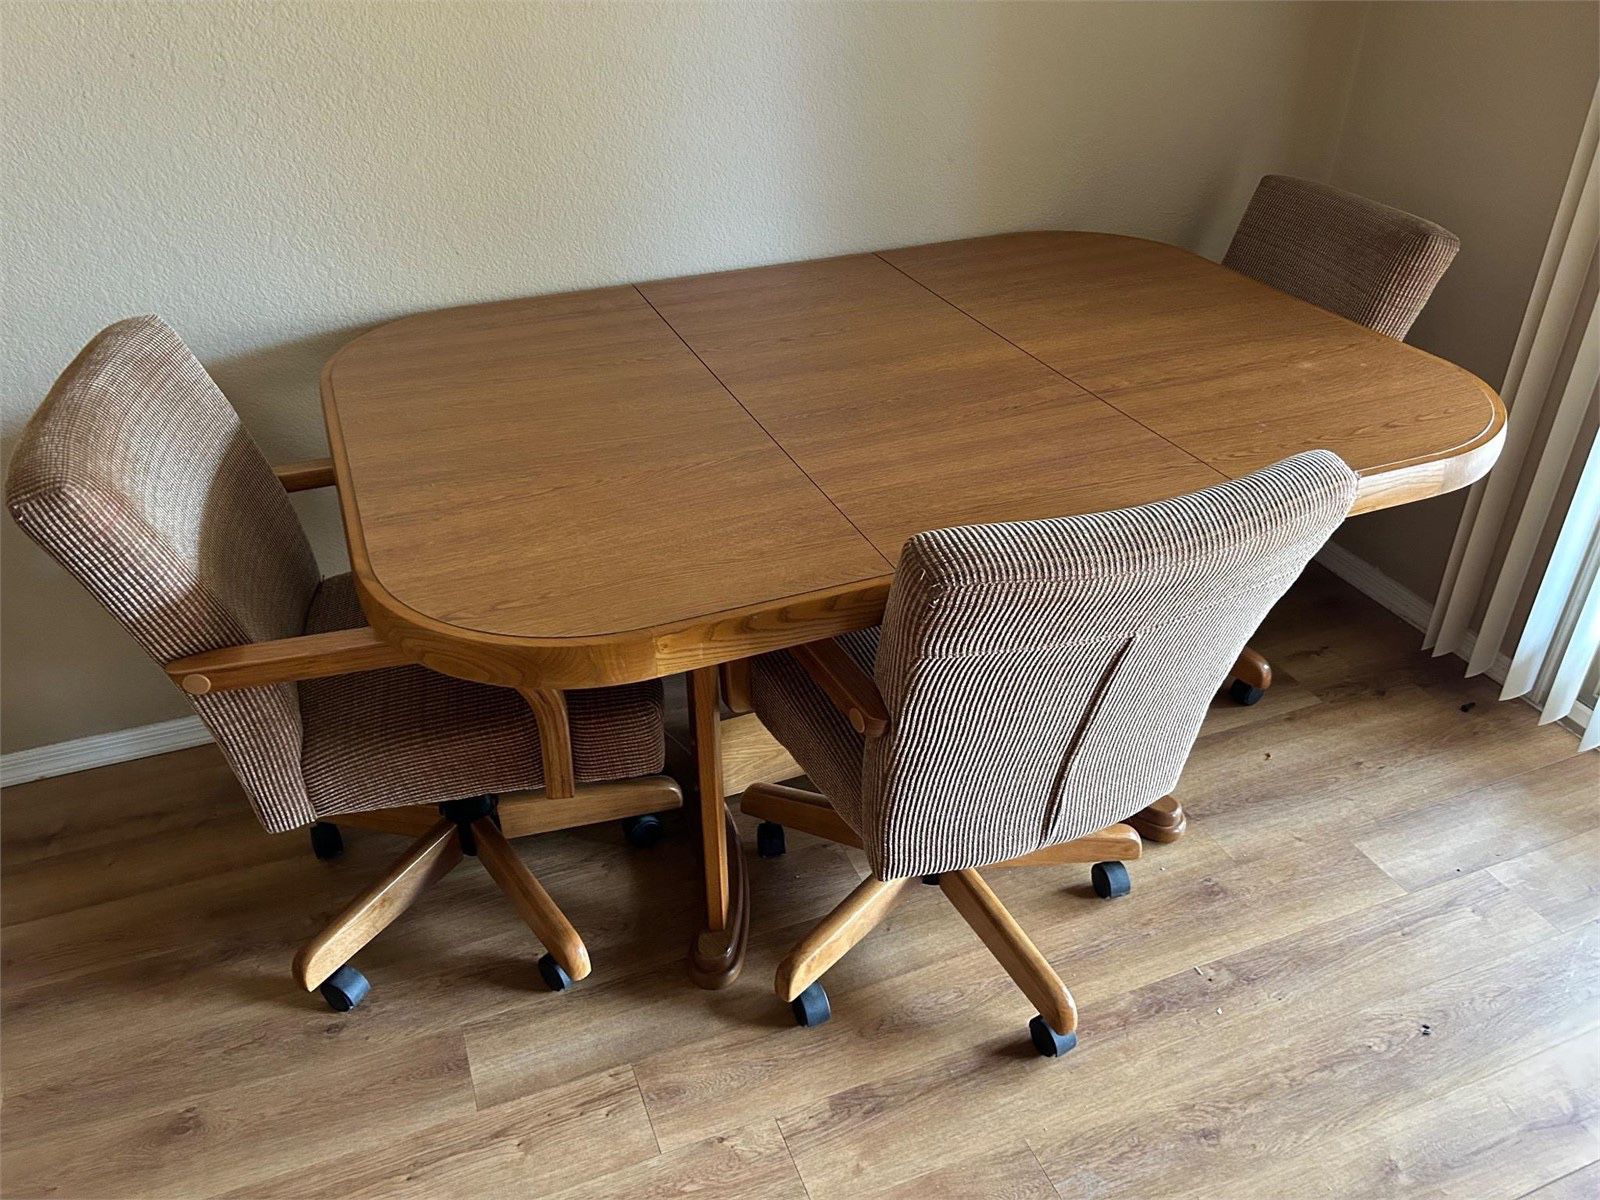 Oak Table With One Leaf And Three Chairs